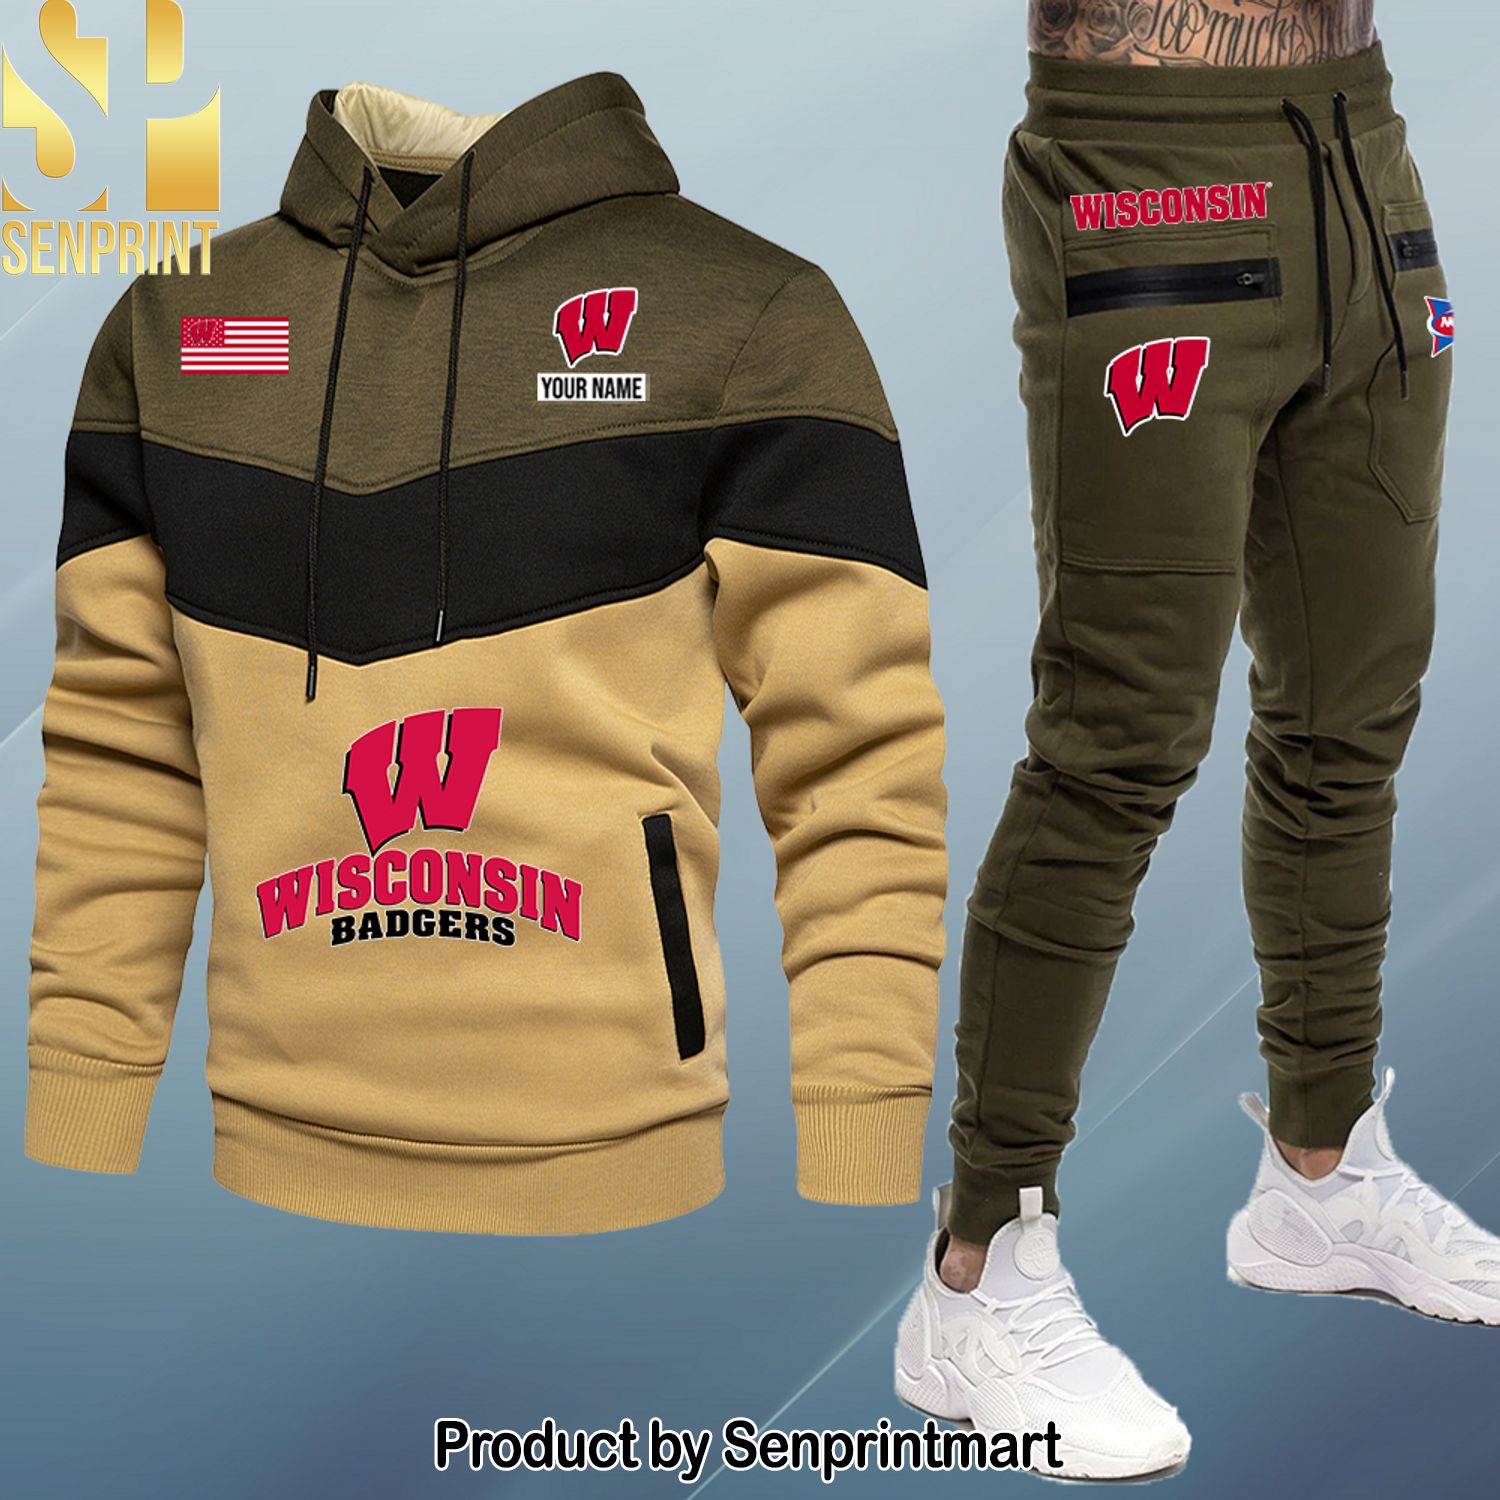 Wisconsin Badgers Cool Version Full Print Shirt and Pants